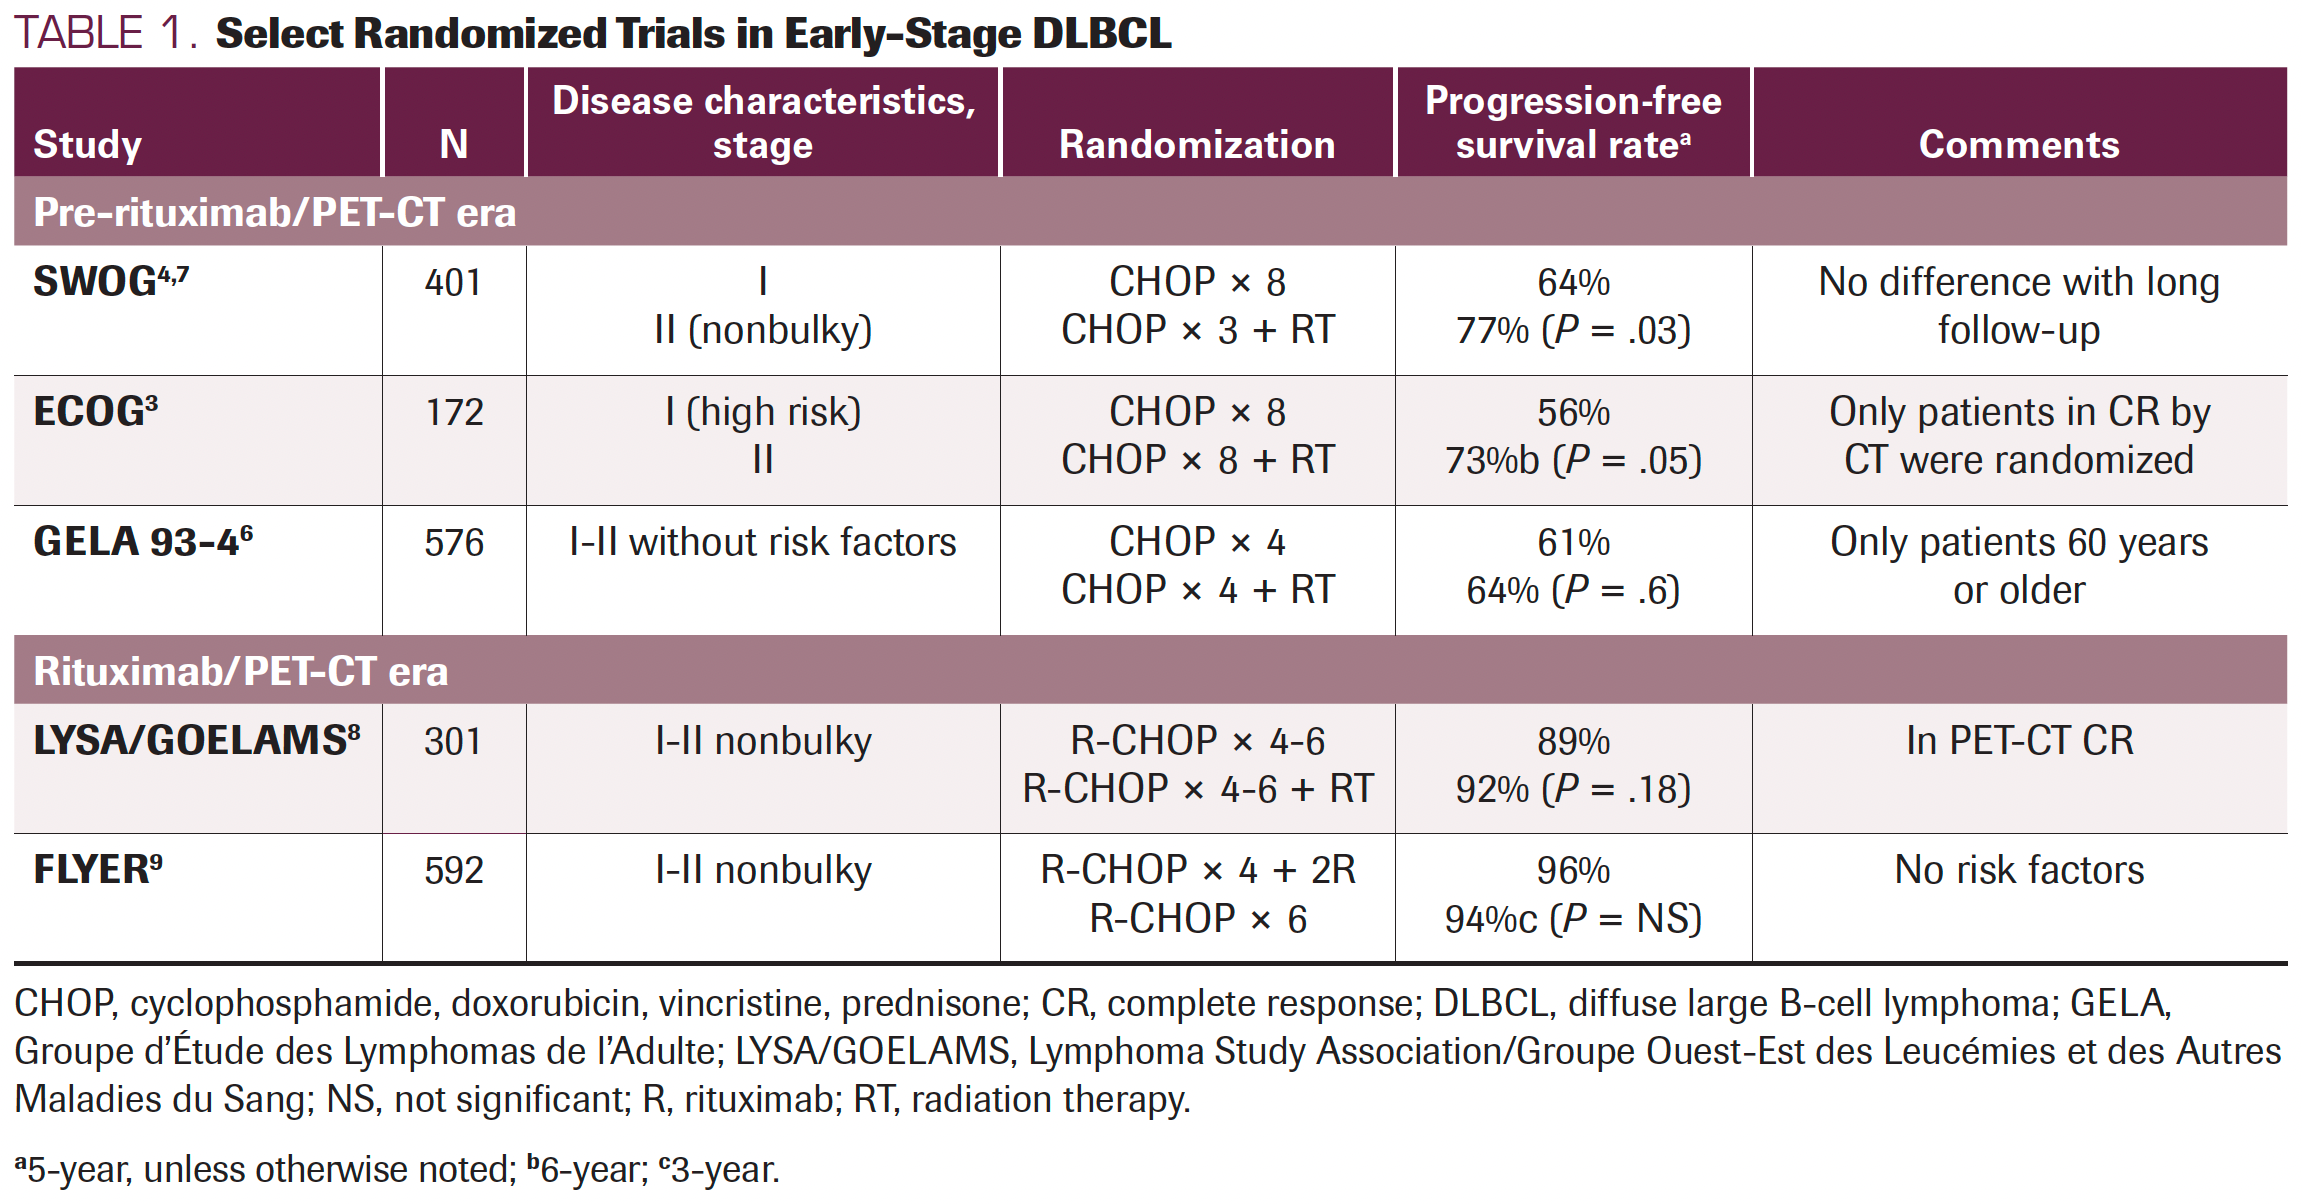 TABLE 1. Select Randomized Trials in Early-Stage DLBCL